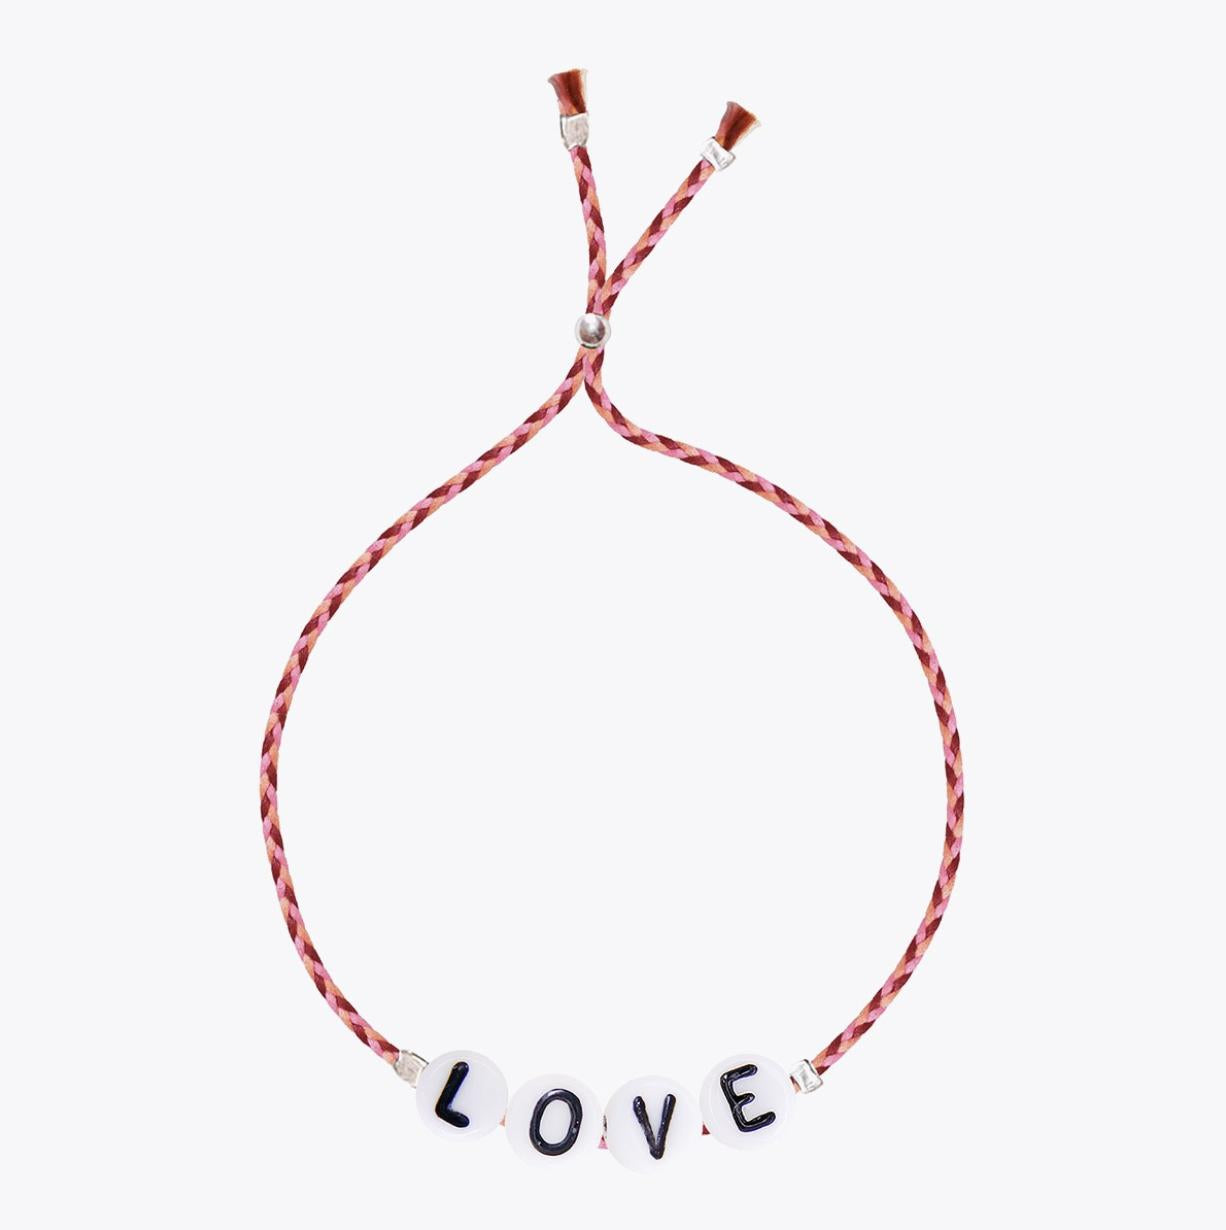 "LOVE" - BUCHSTABEN ARMBAND - Oh Happy Life